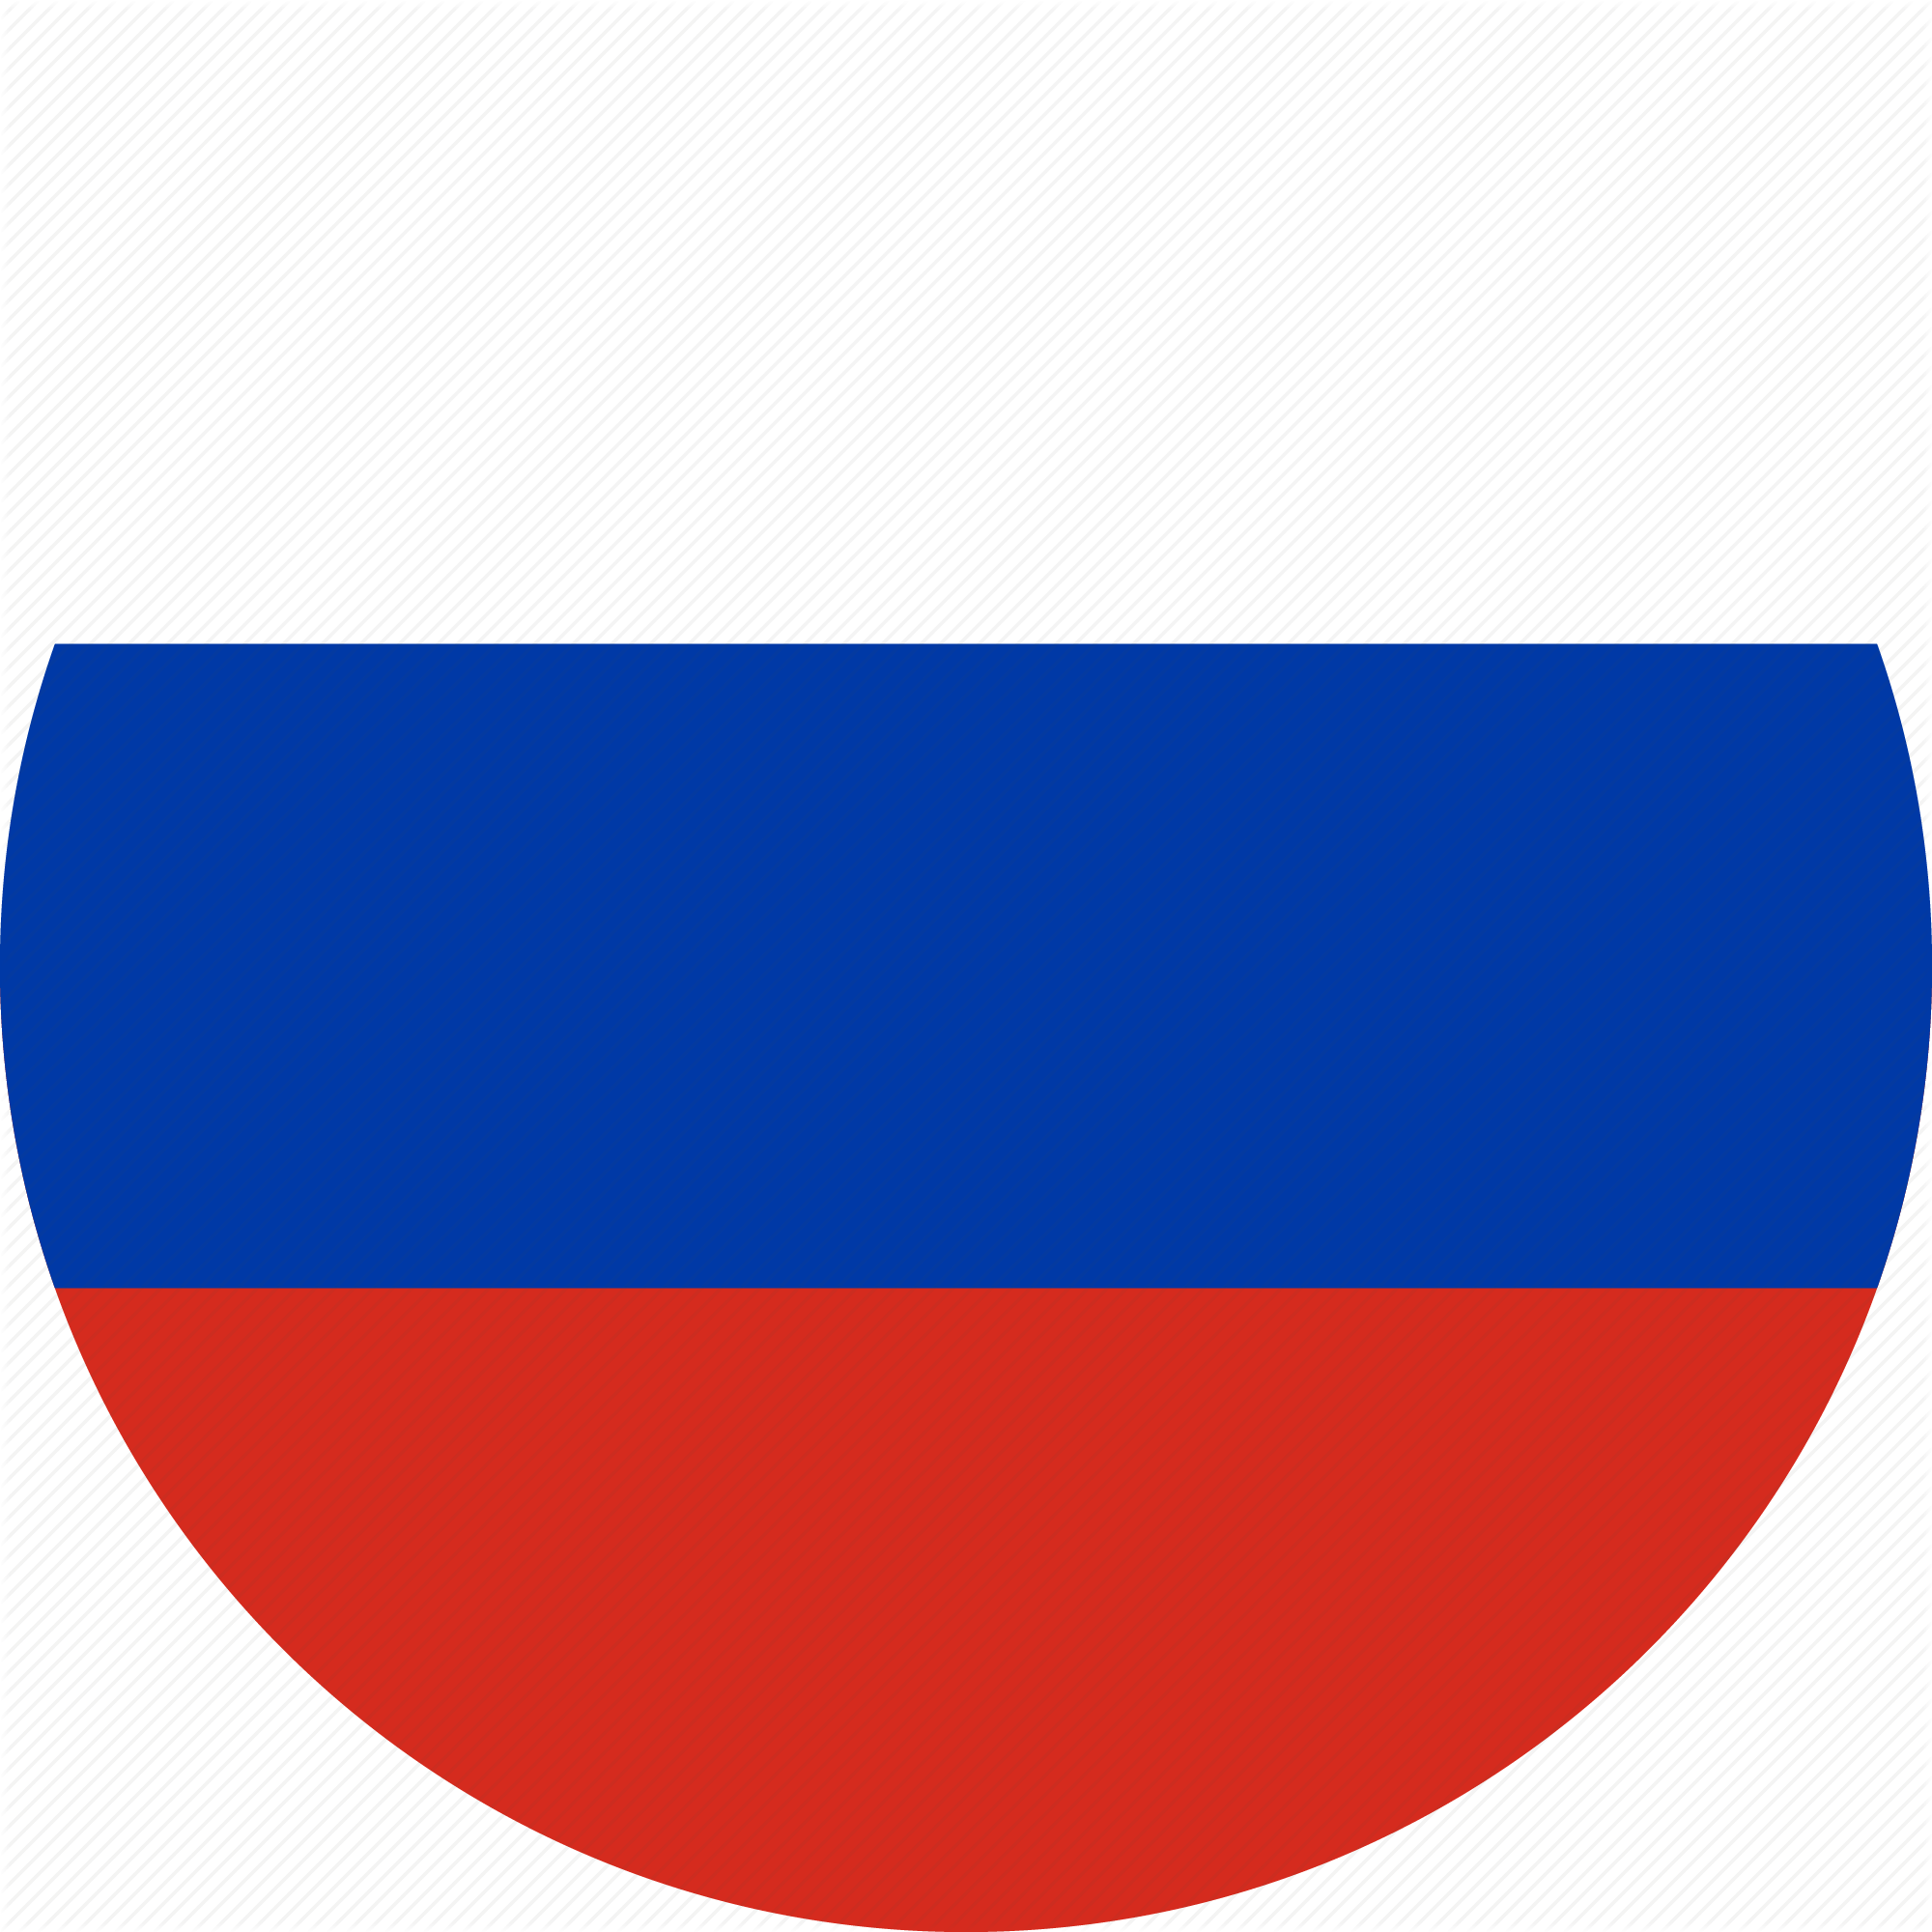 Russia Flag Png Transparent Images - Covent Garden (2000x2000)